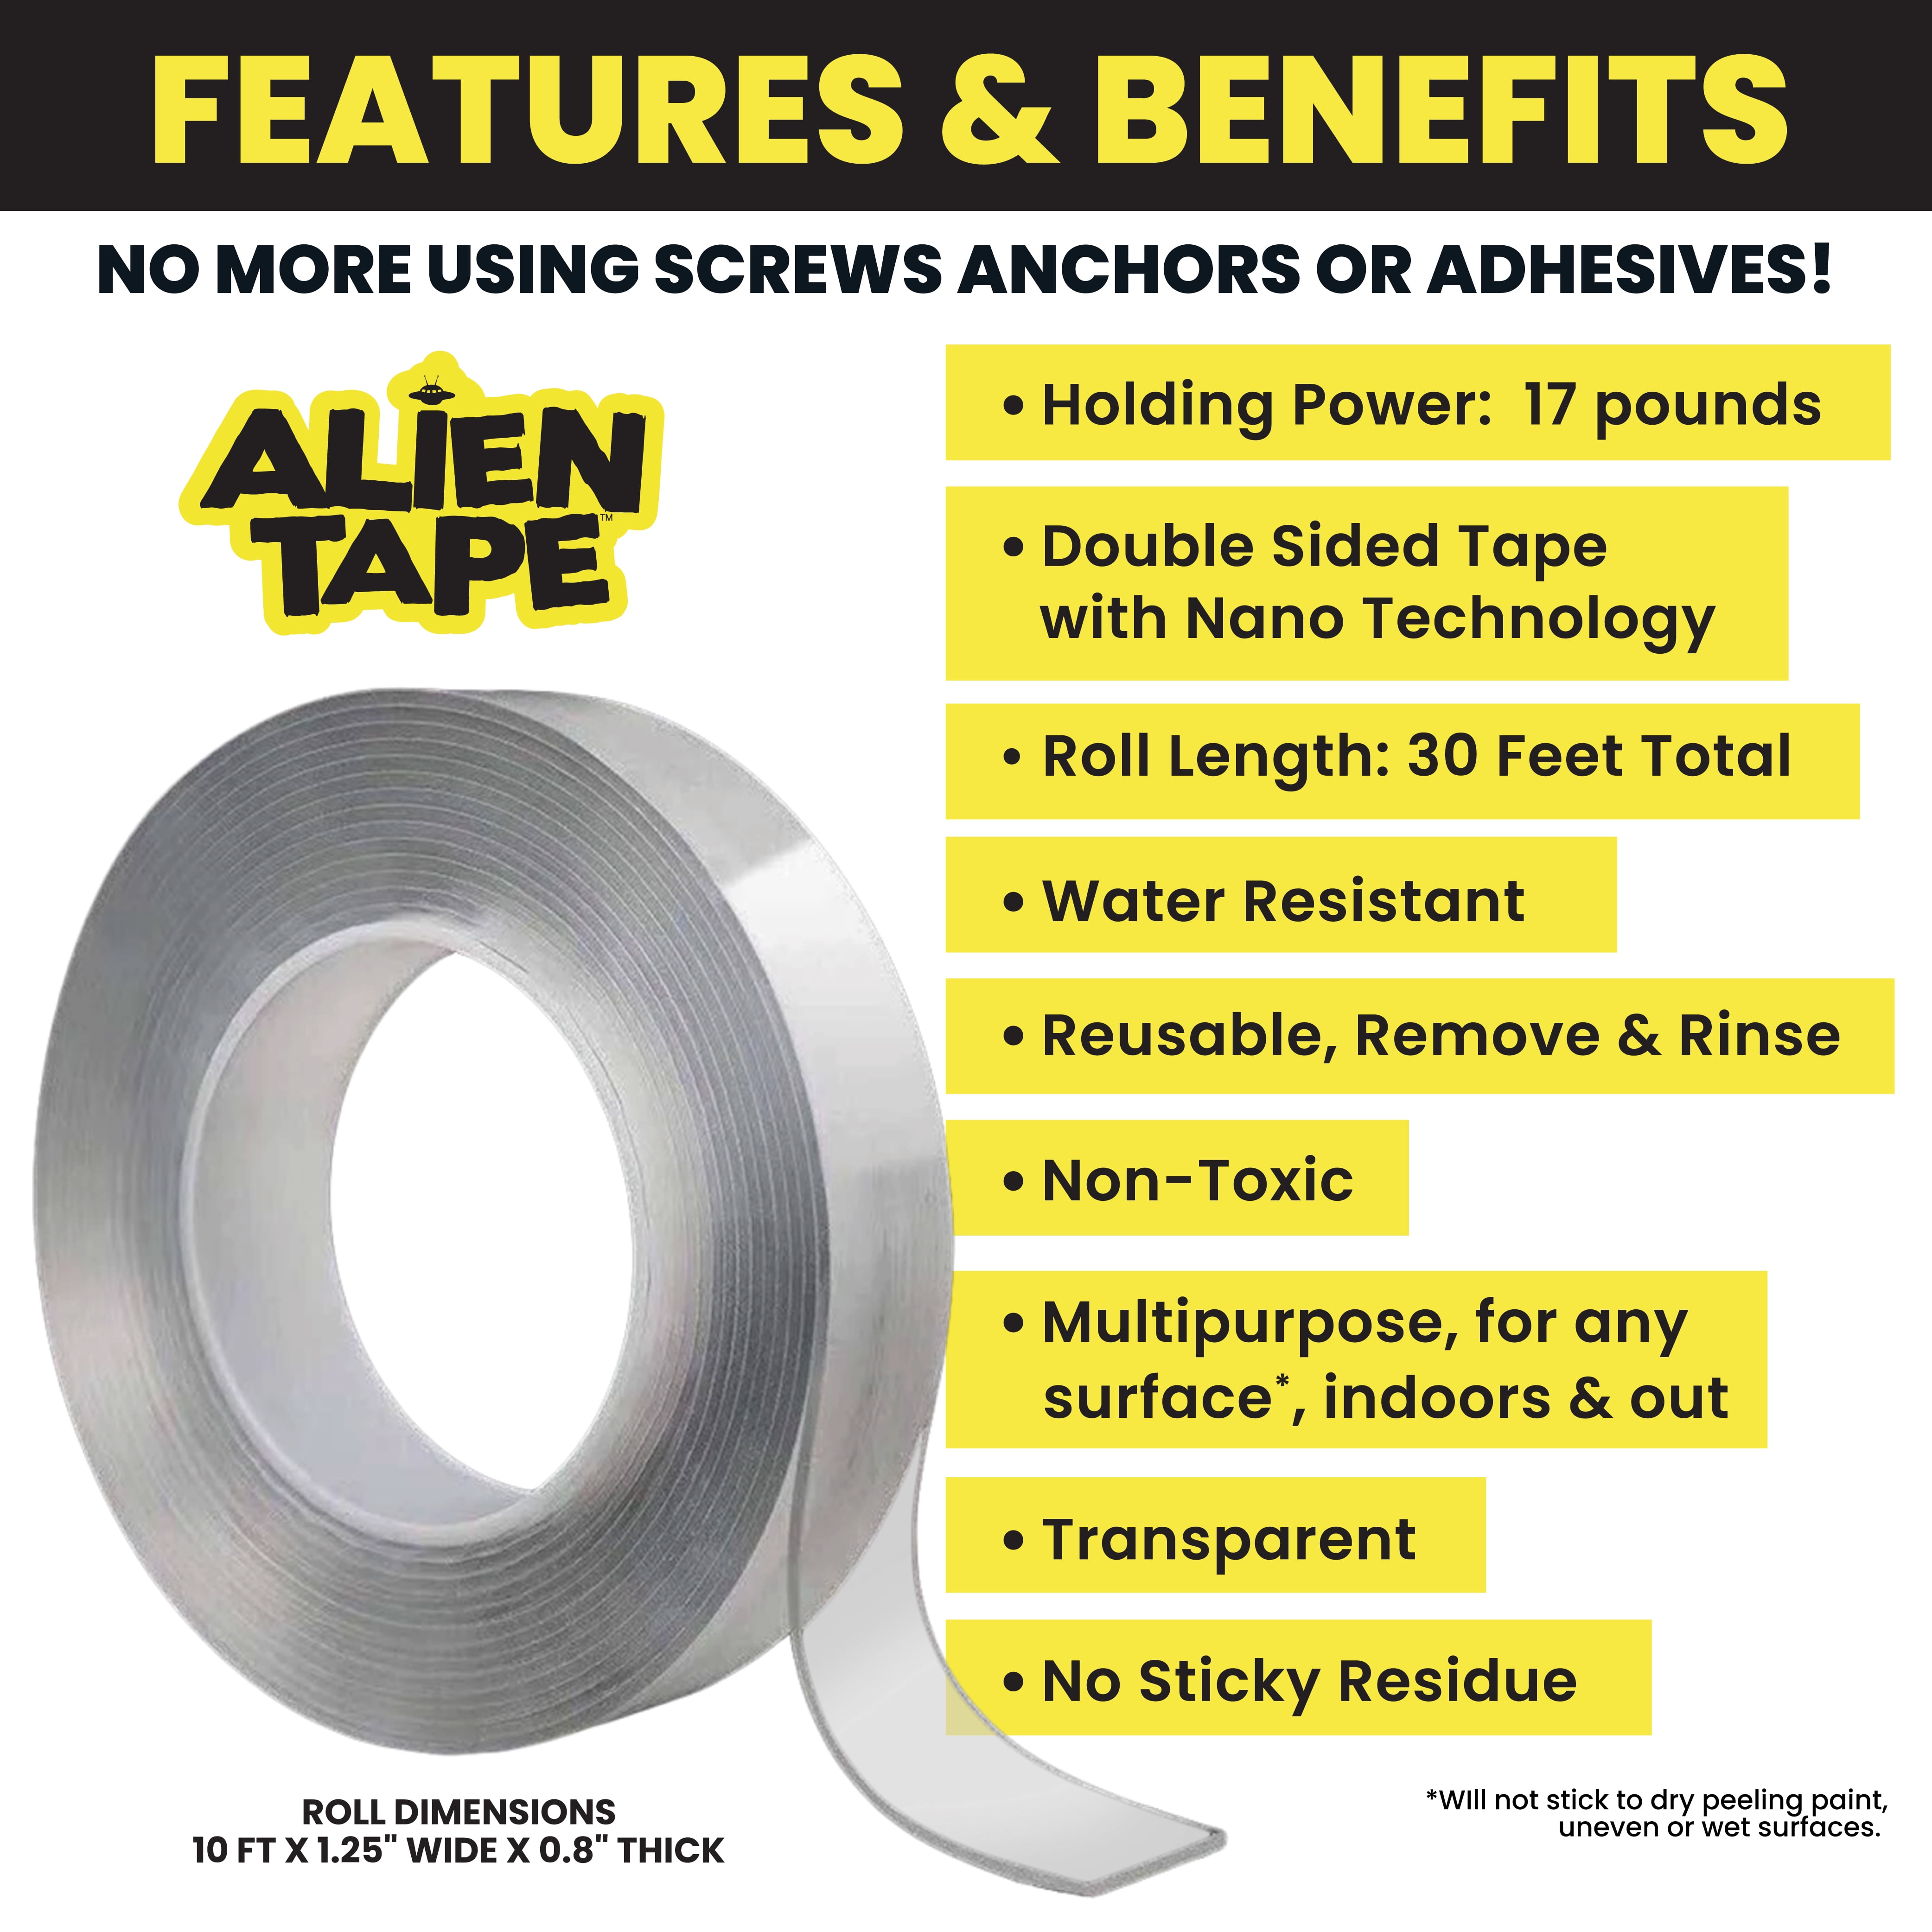 Alien Tape Strips - Instantly Locks Anything Into Place Without Screws,  Anchors or Adhesive!